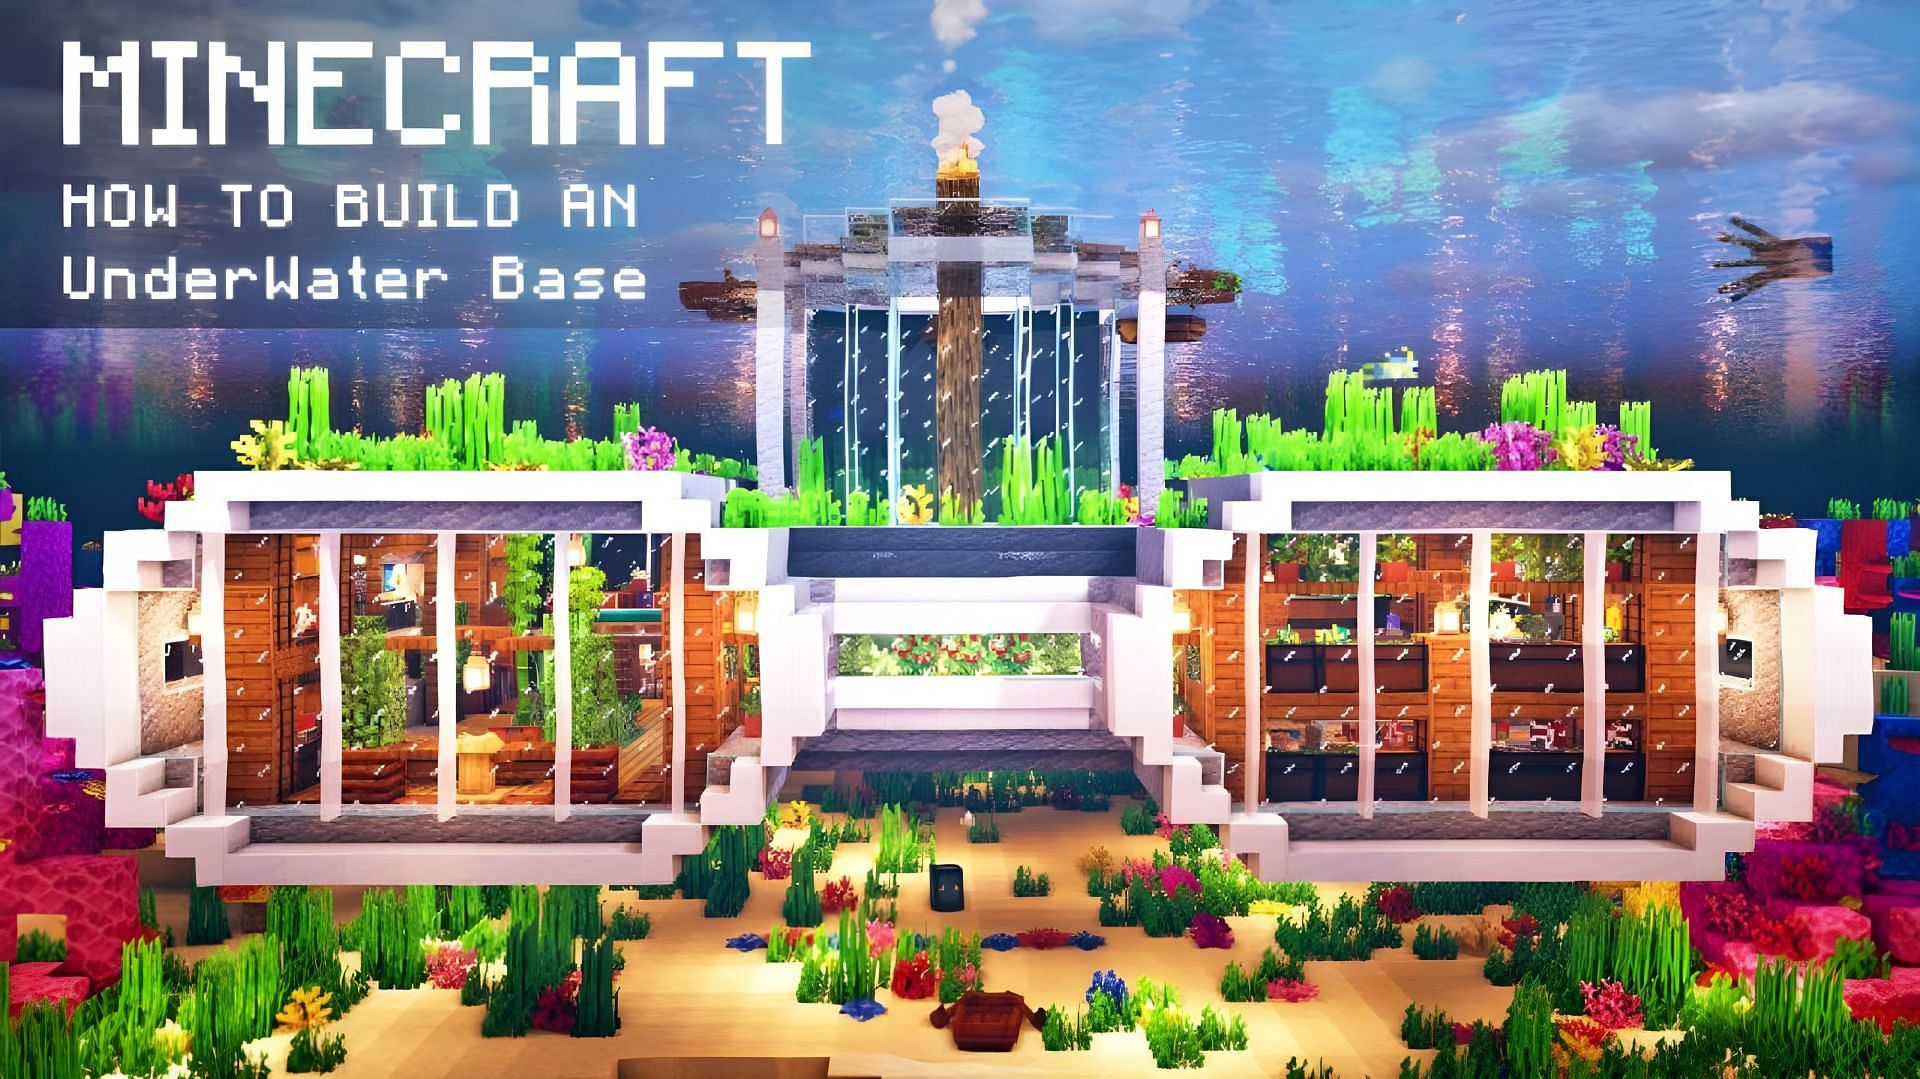 Underwater base designs are always some of the best Minecraft abodes (Image via Youtube/SheepGG)